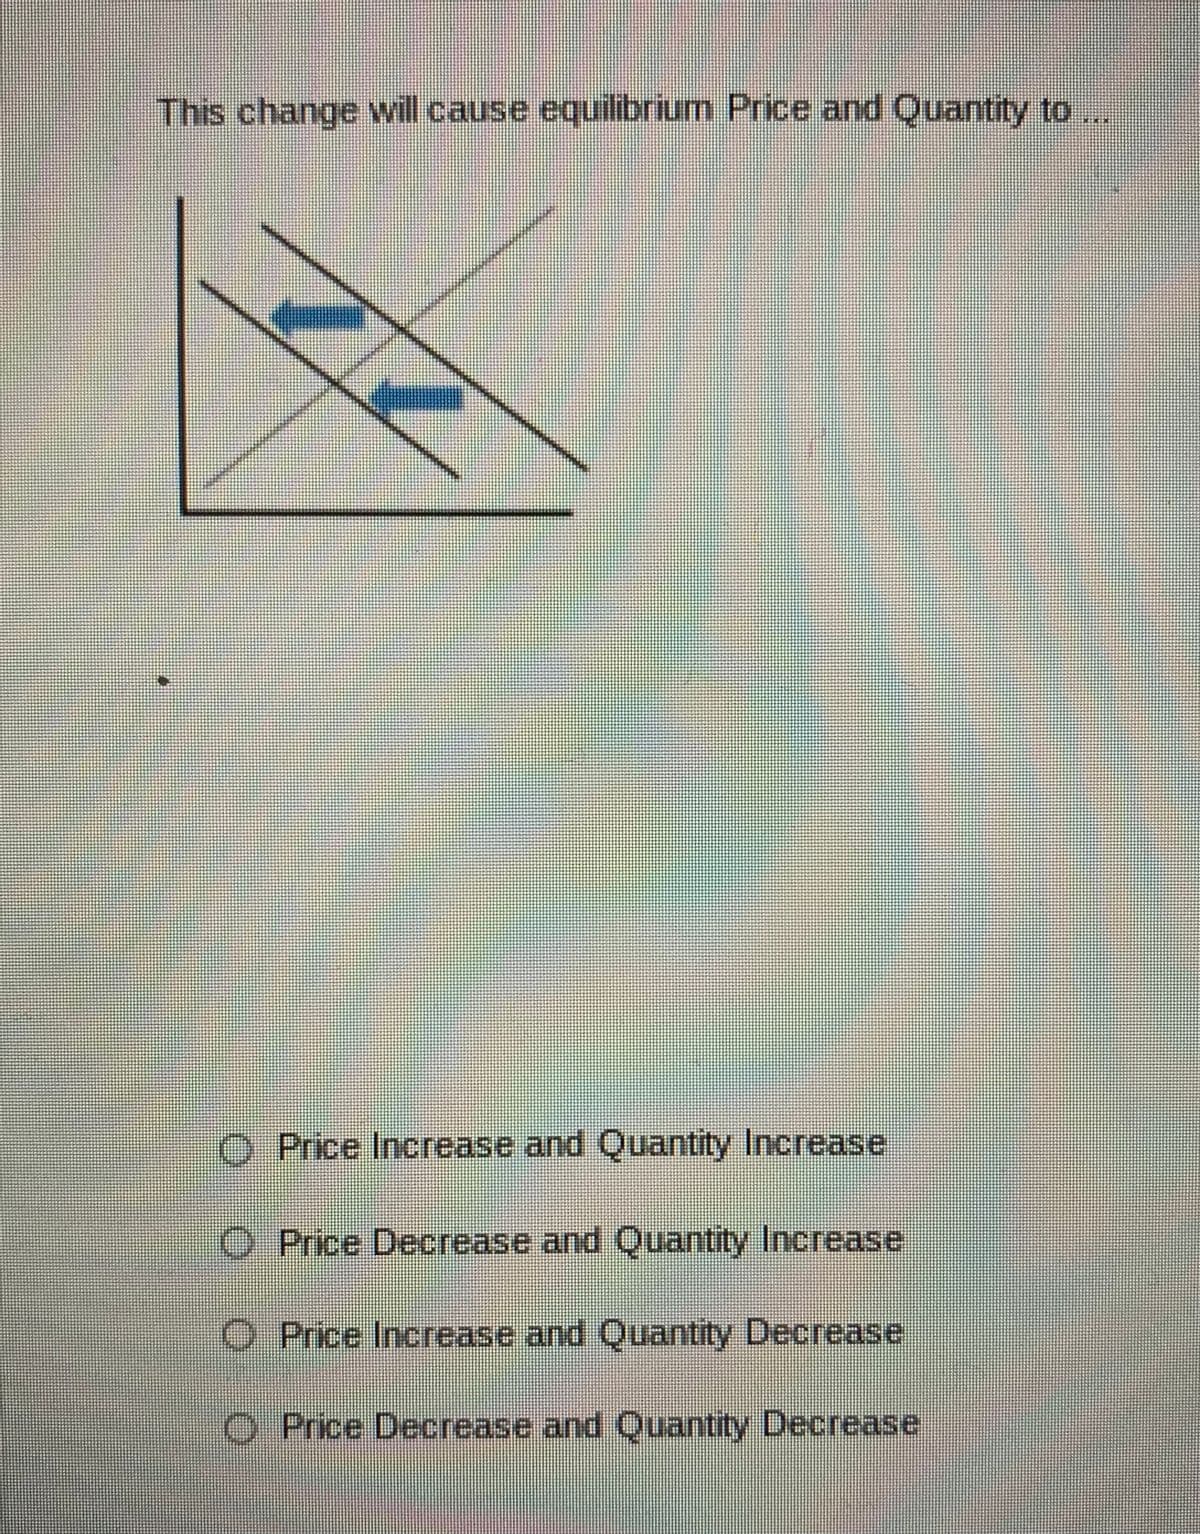 This change will cause equilibrium Price and Quantity to,
Price Increase and Quantity Increase
O Price Decrease and Quantity Increase
O Price Increase and Quantity Decrease
O Price Decrease and Quantity Decrease
